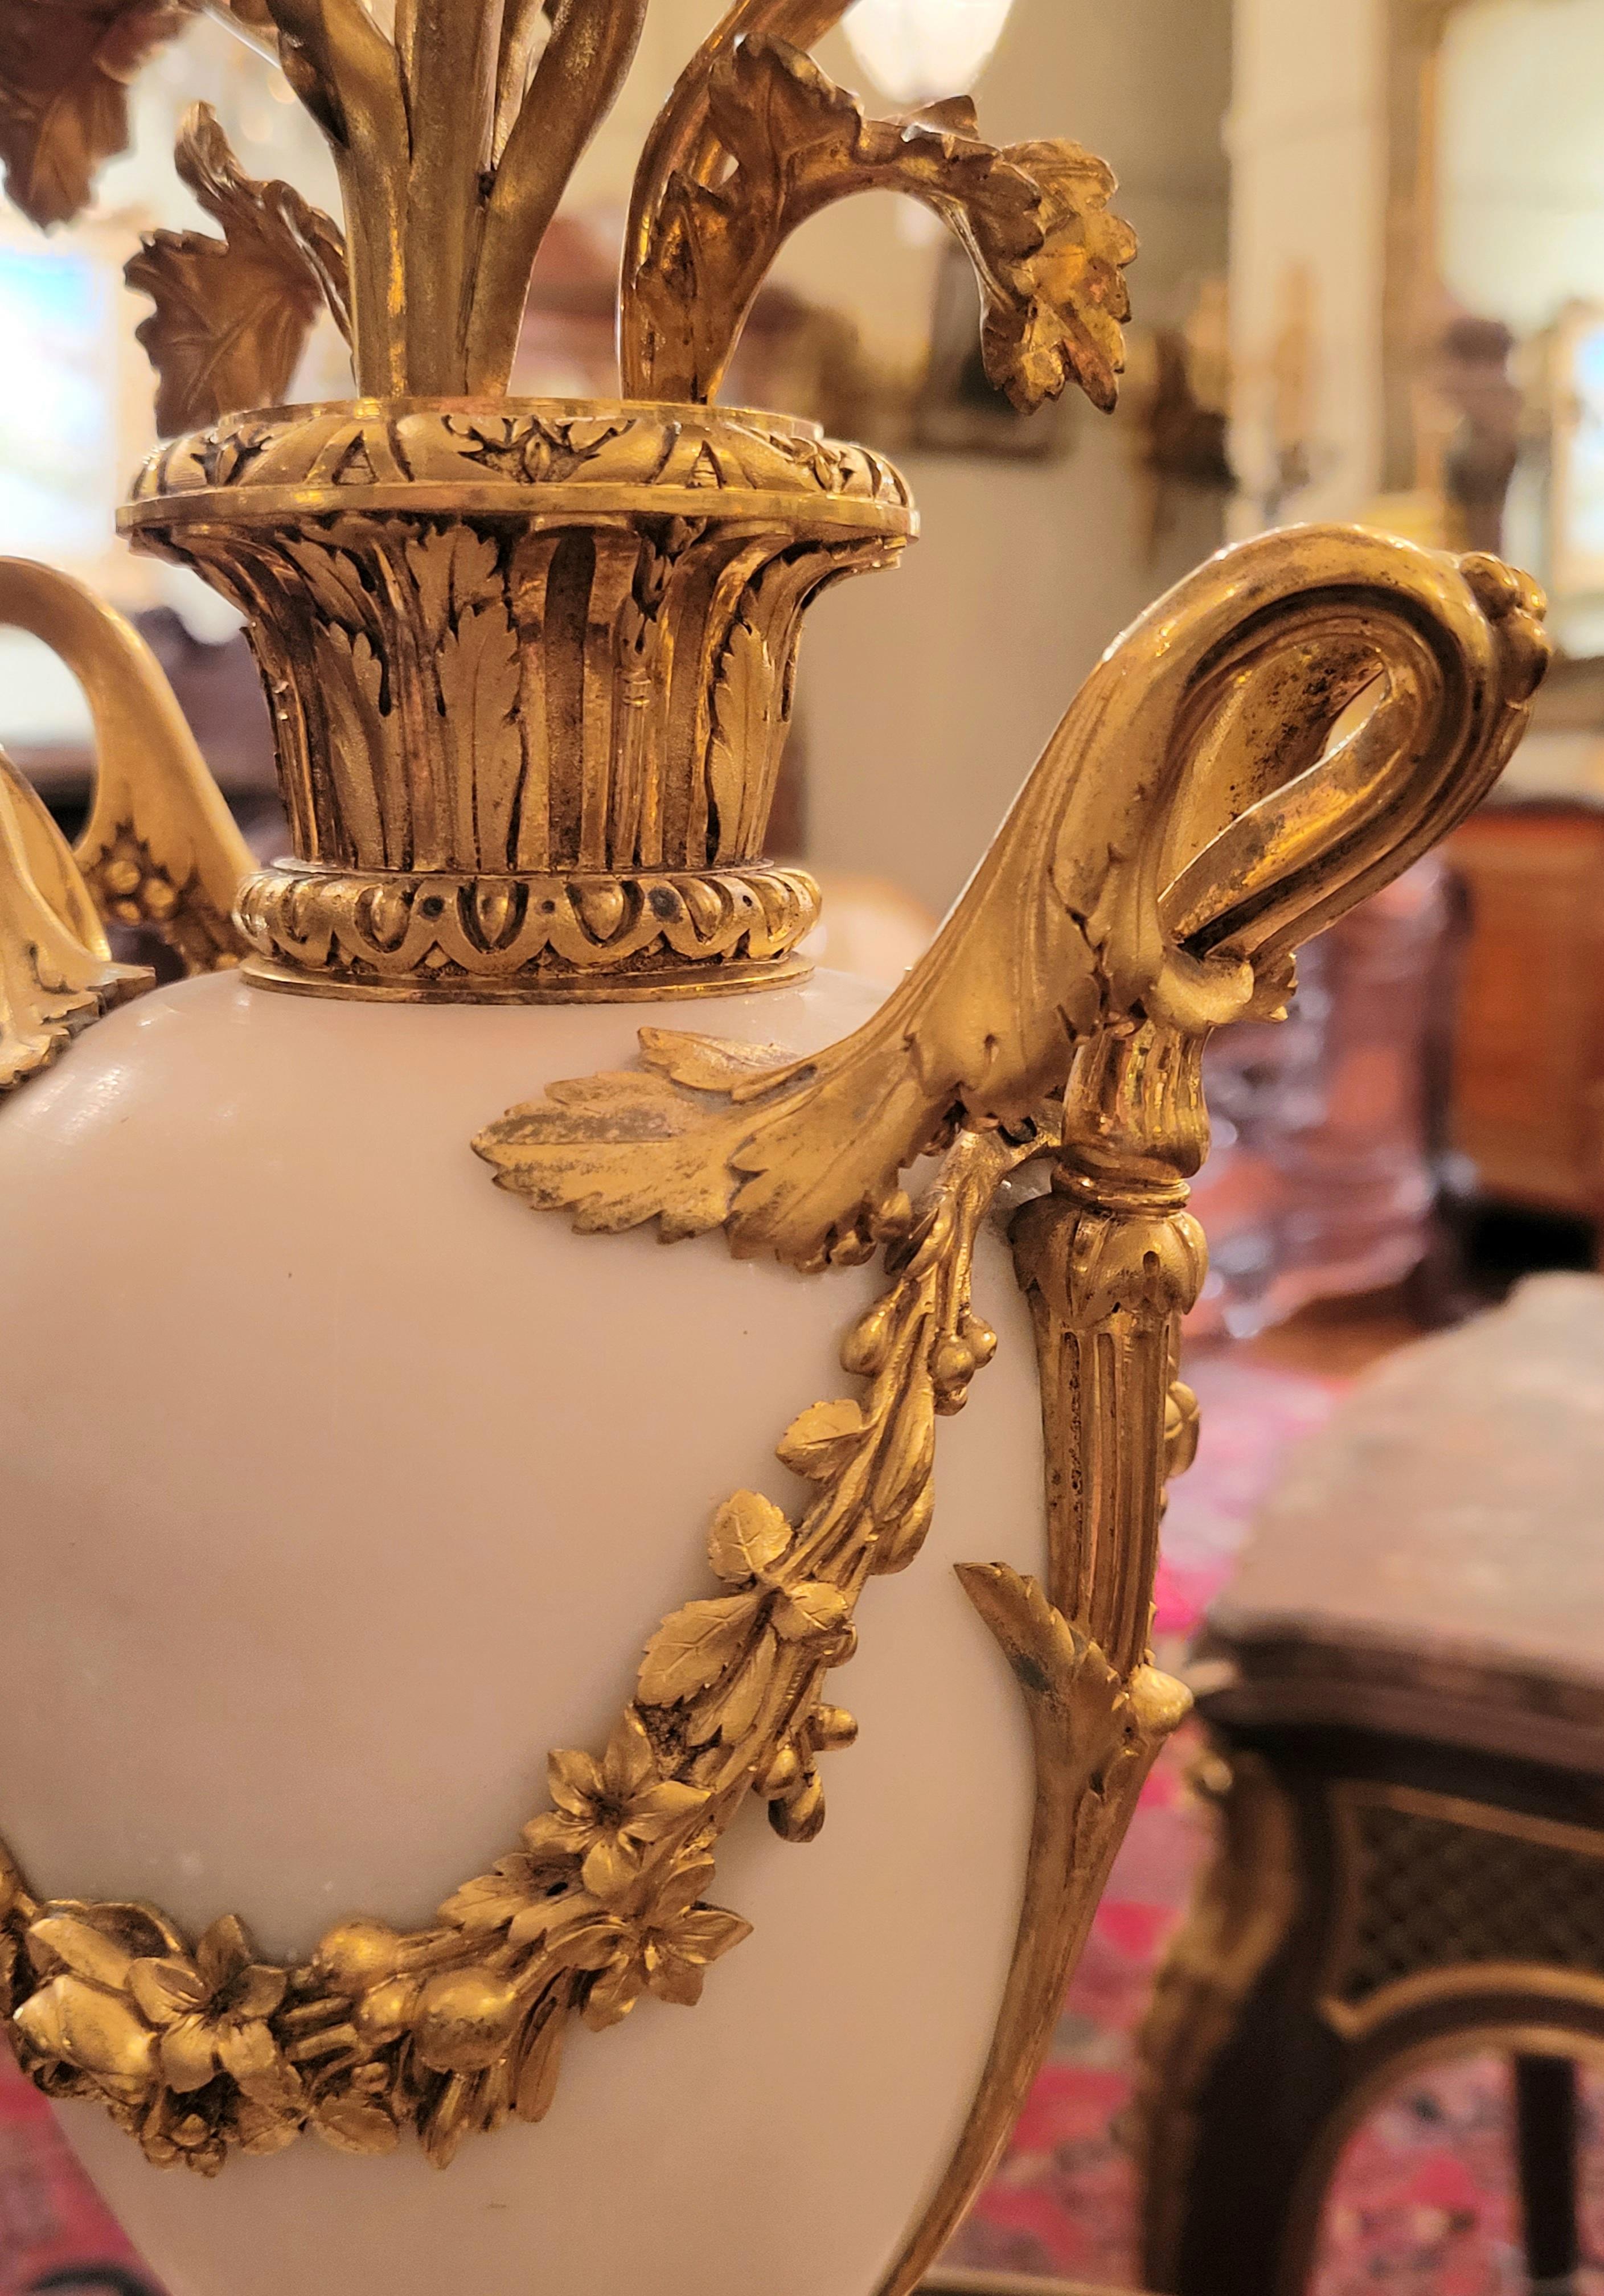 These beautiful candelabra have the grace and form sought after by our collectors.